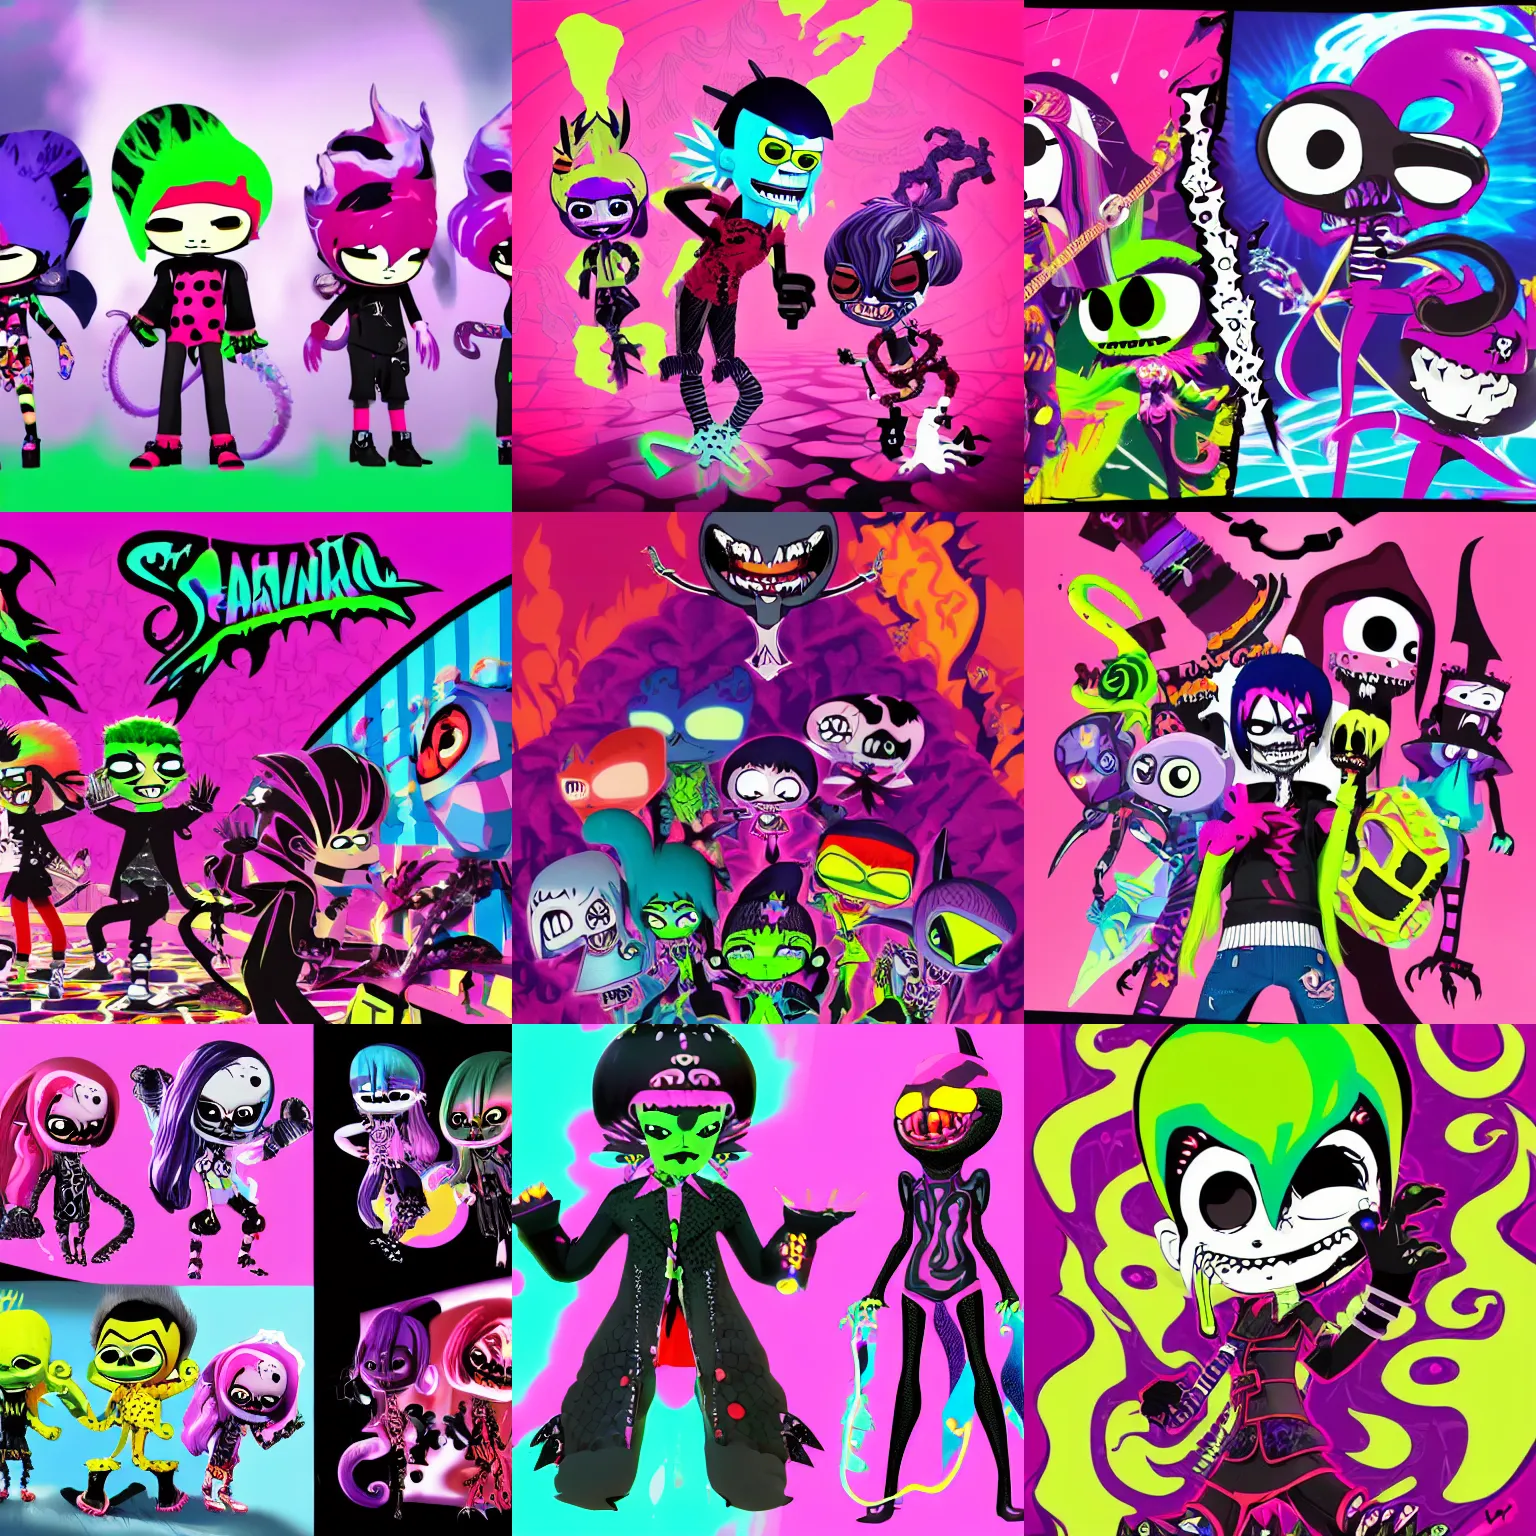 Prompt: CGI lisa frank gothic punk vampiric electrifying vampiric squid character designs of varying shapes and sizes by genndy tartakovsky and Jamie Hewlett from gorillaz for a new splatoon game by nintendo high resolution, rtx